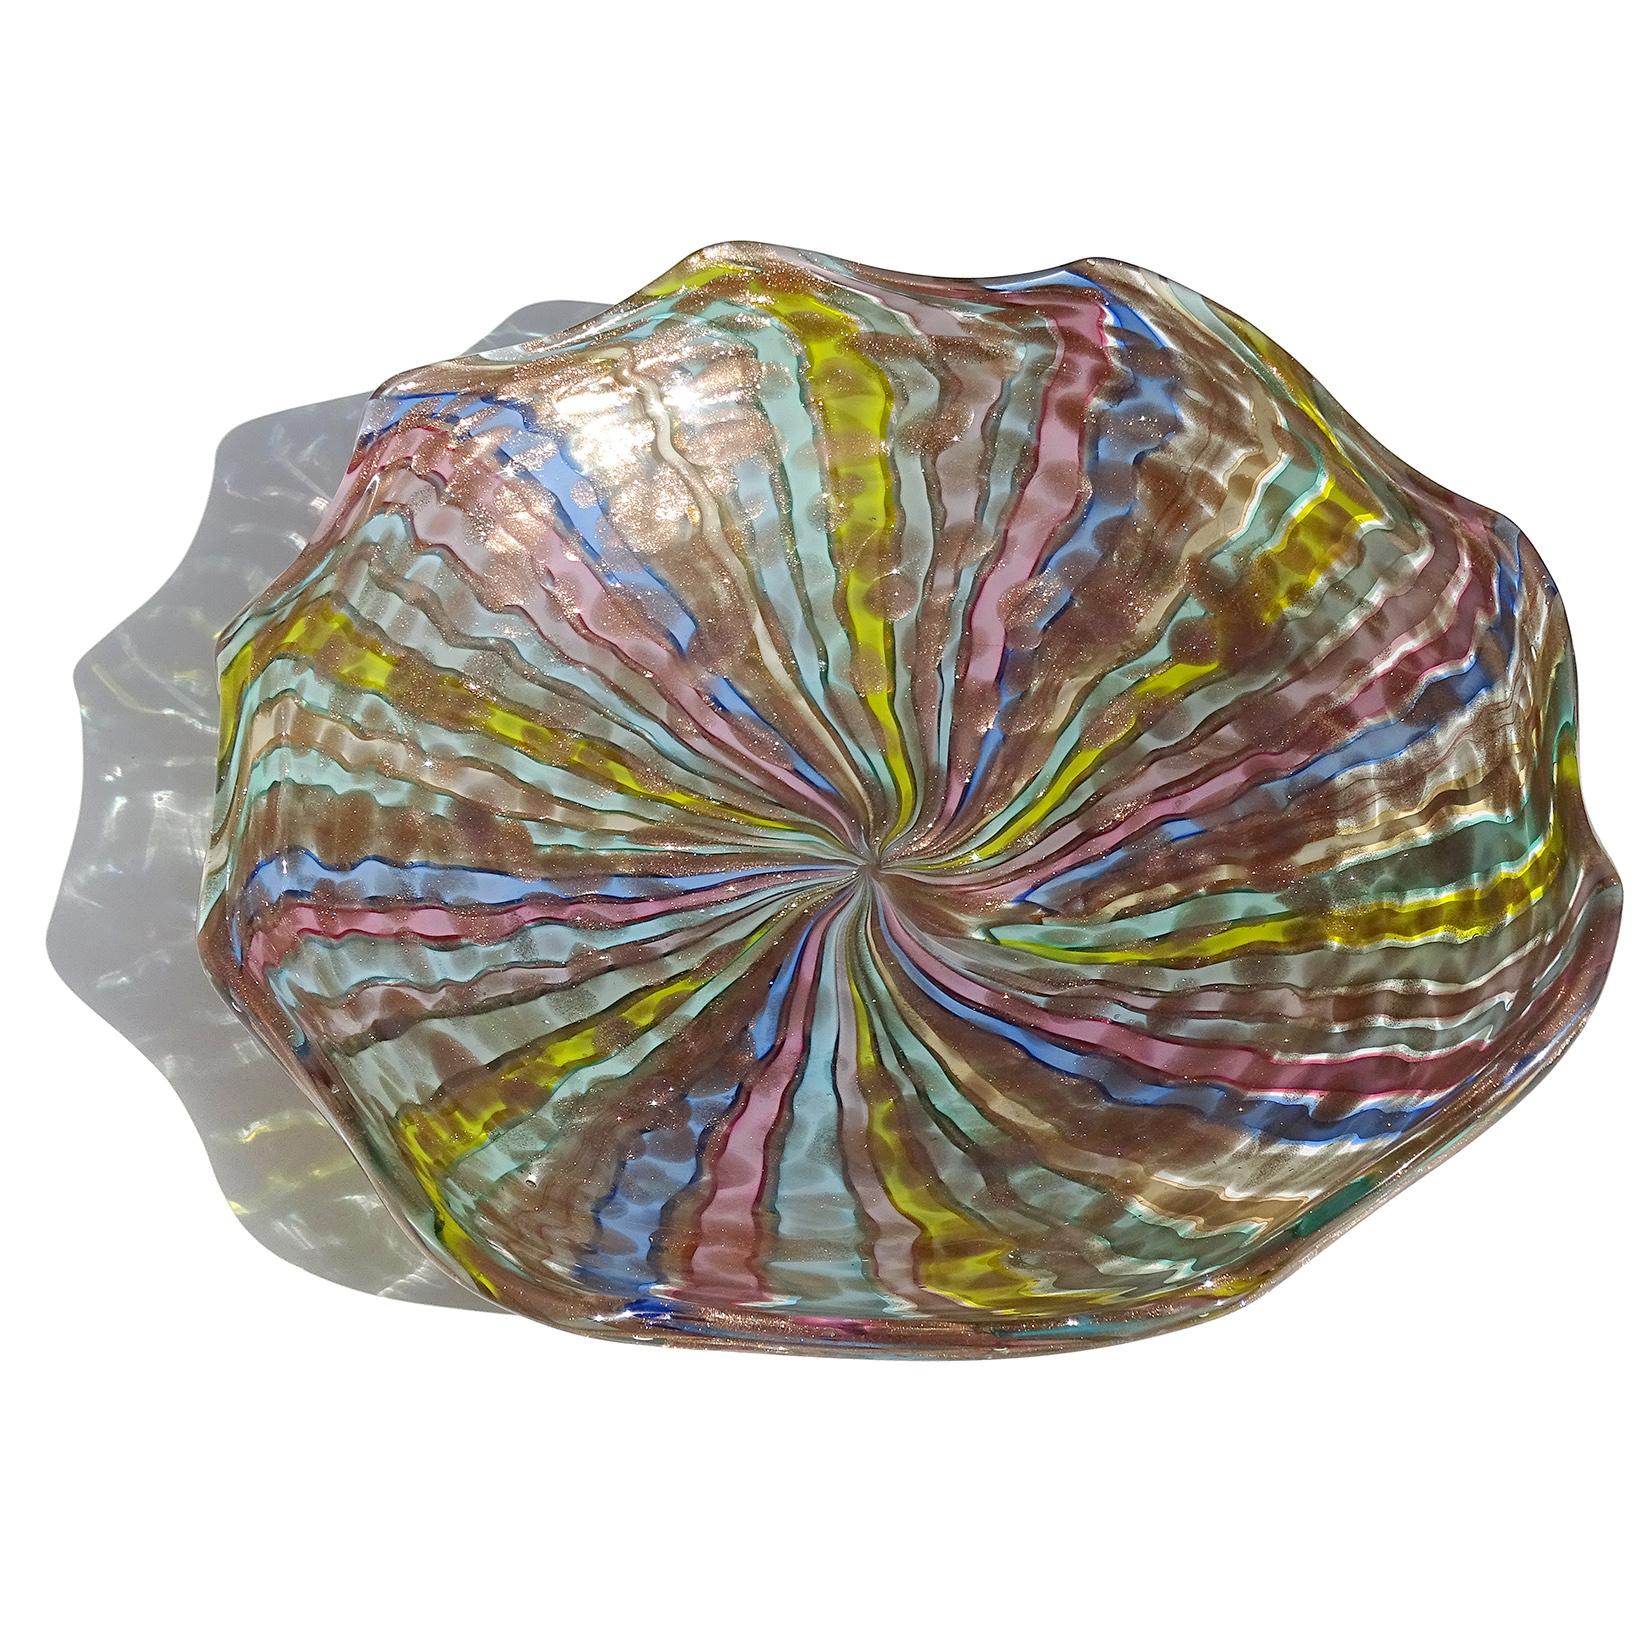 Beautiful, extra large, and colorful vintage Murano hand blown rainbow Filigrana ribbons and aventurine spots Italian art glass centerpiece bowl. Documented to the Fratelli Toso company. The bowl has an oval shape, ruffle rim, with alternating bands